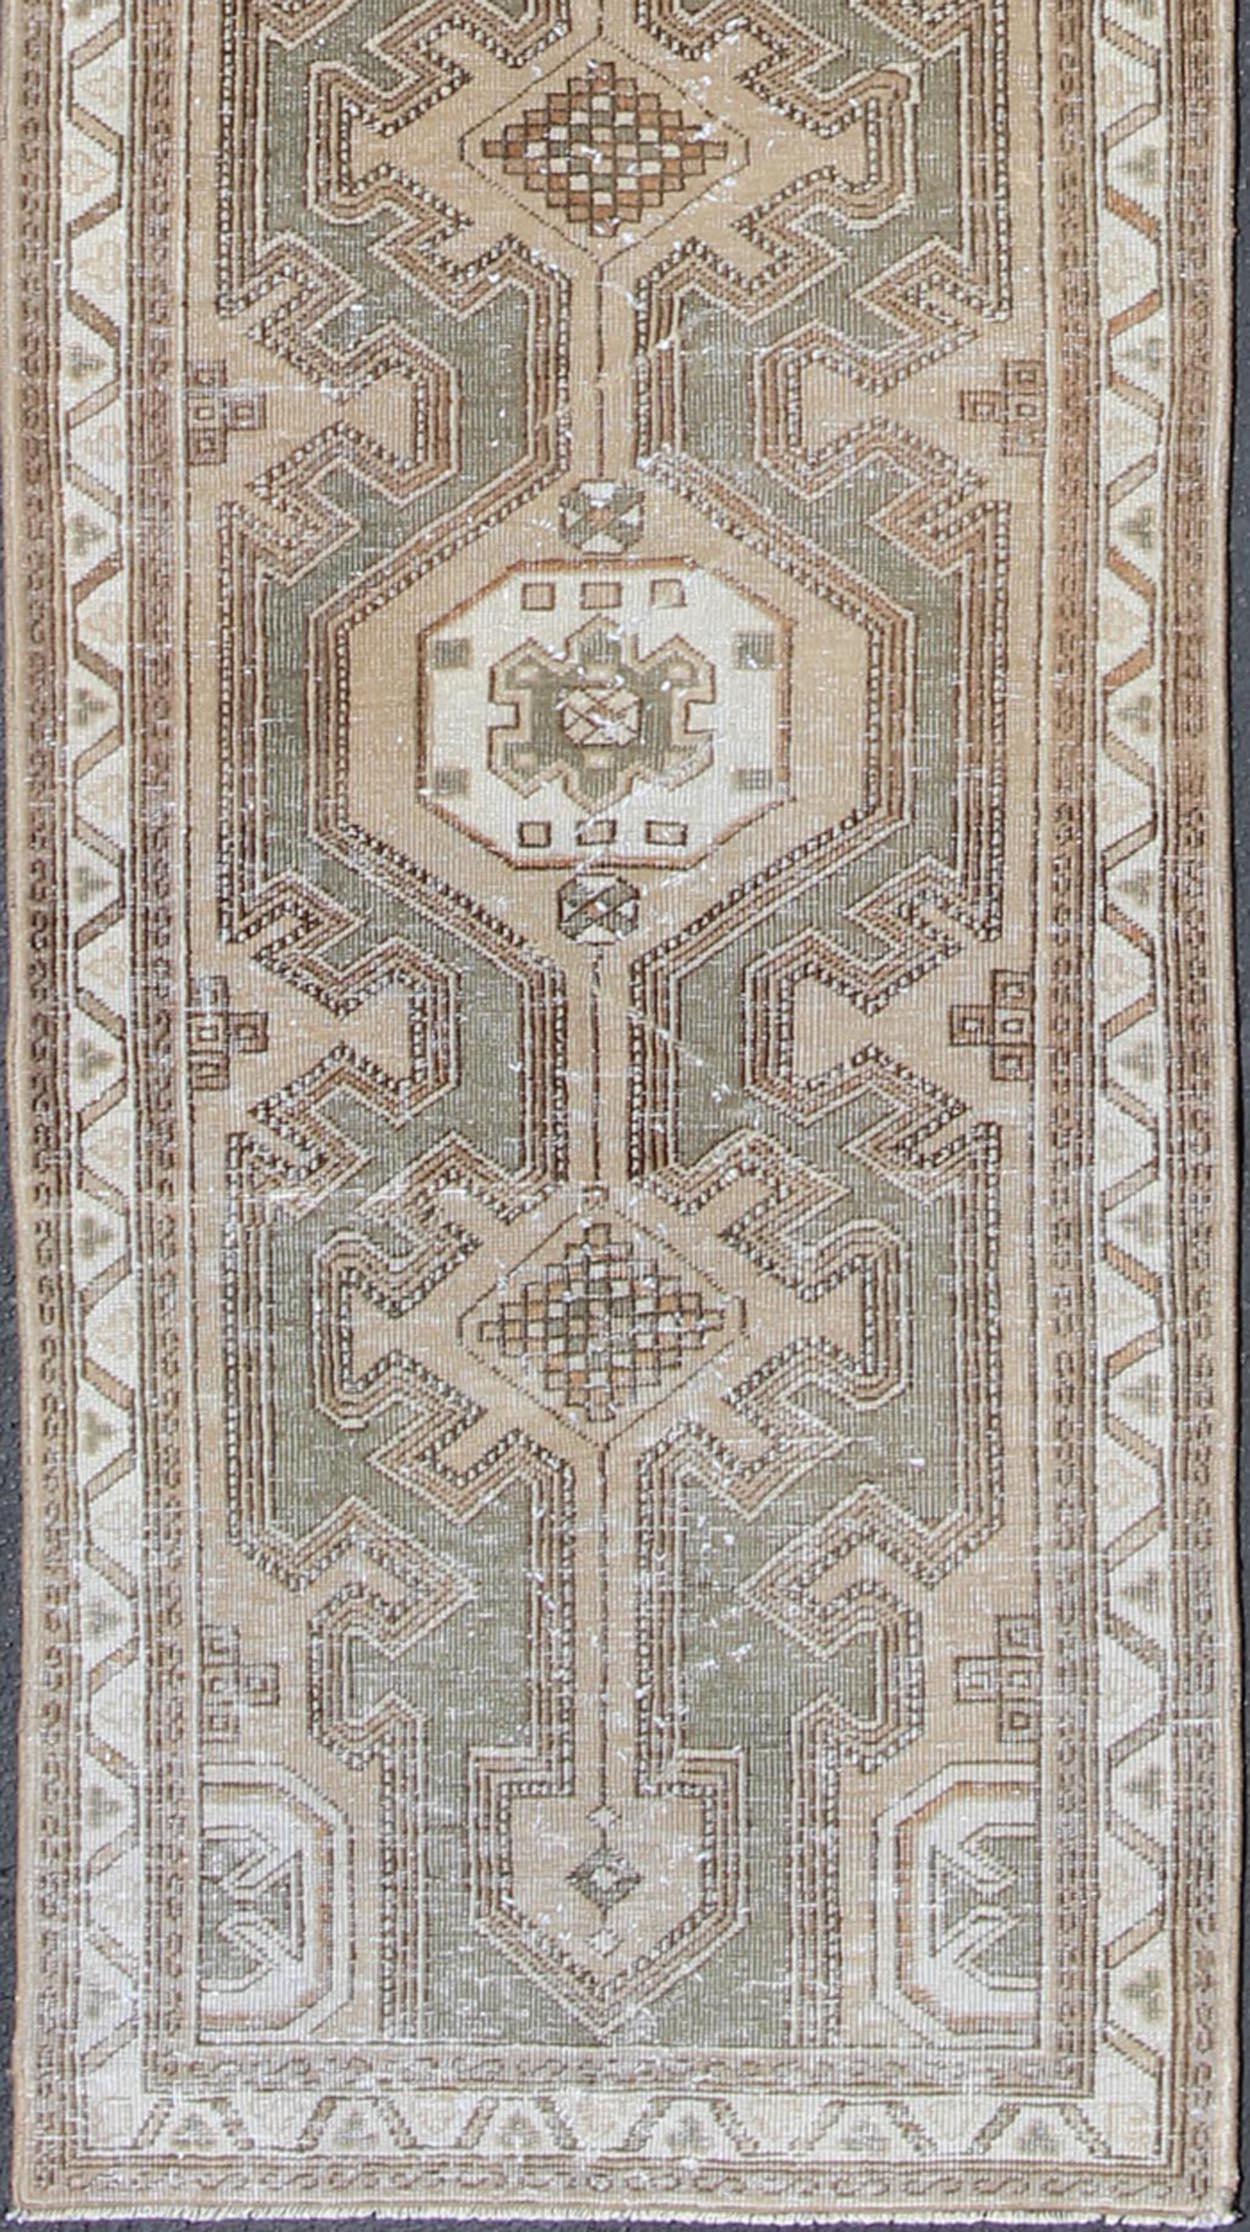 Serab antique runner from Persia with medallion design in earthy color palette, rug en-176214, country of origin / type: Iran / Serab, circa 1910.

This antique Serab runner is adorned with geometric-style medallions. Beautifully drawn ivory